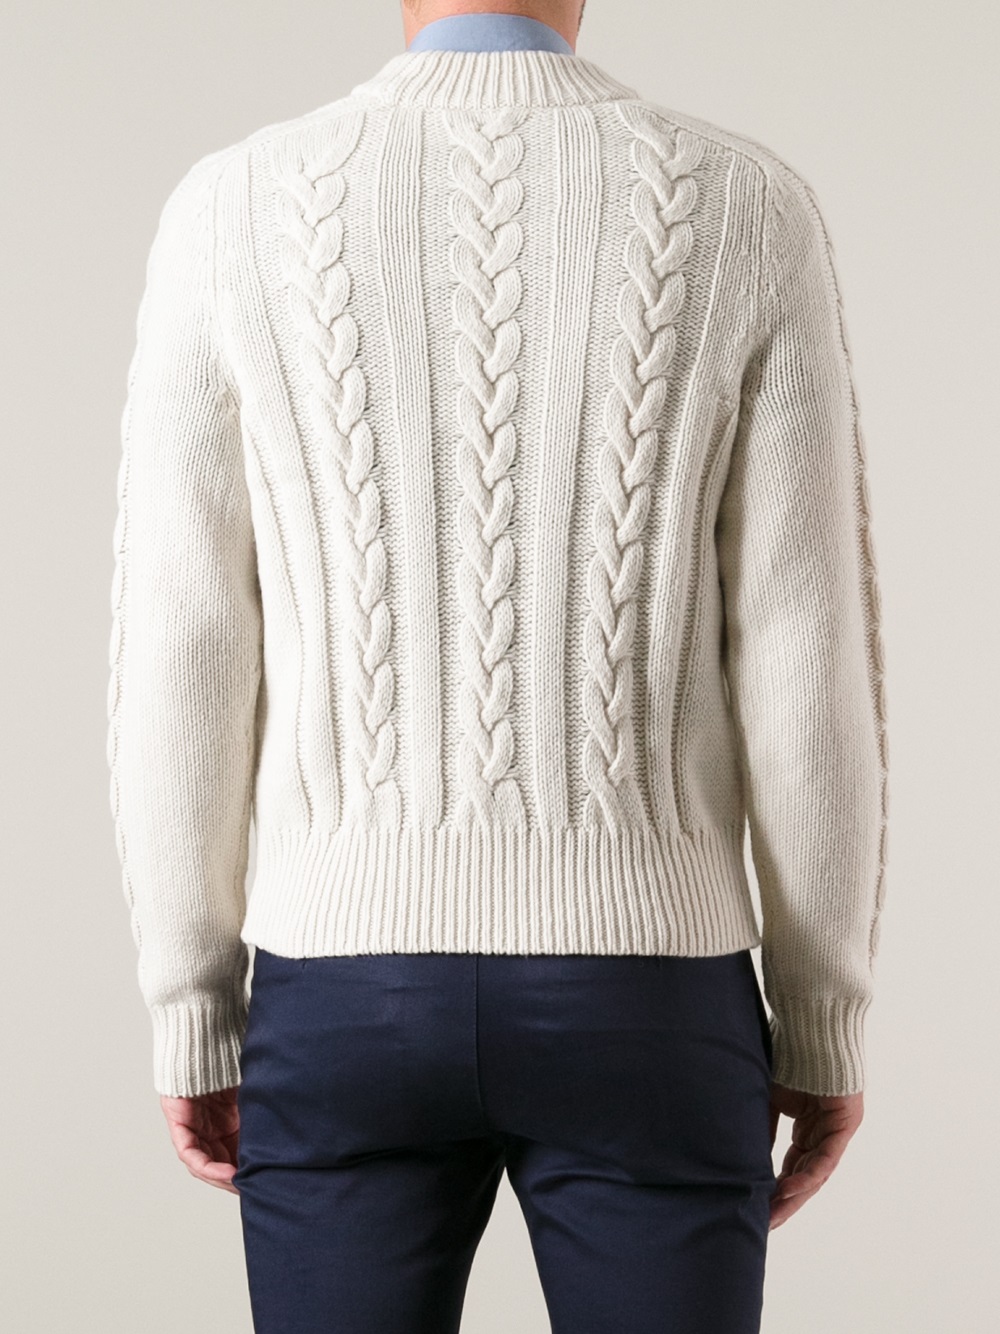 Lyst - Acne Studios Brent Cable Knit Sweater in White for Men